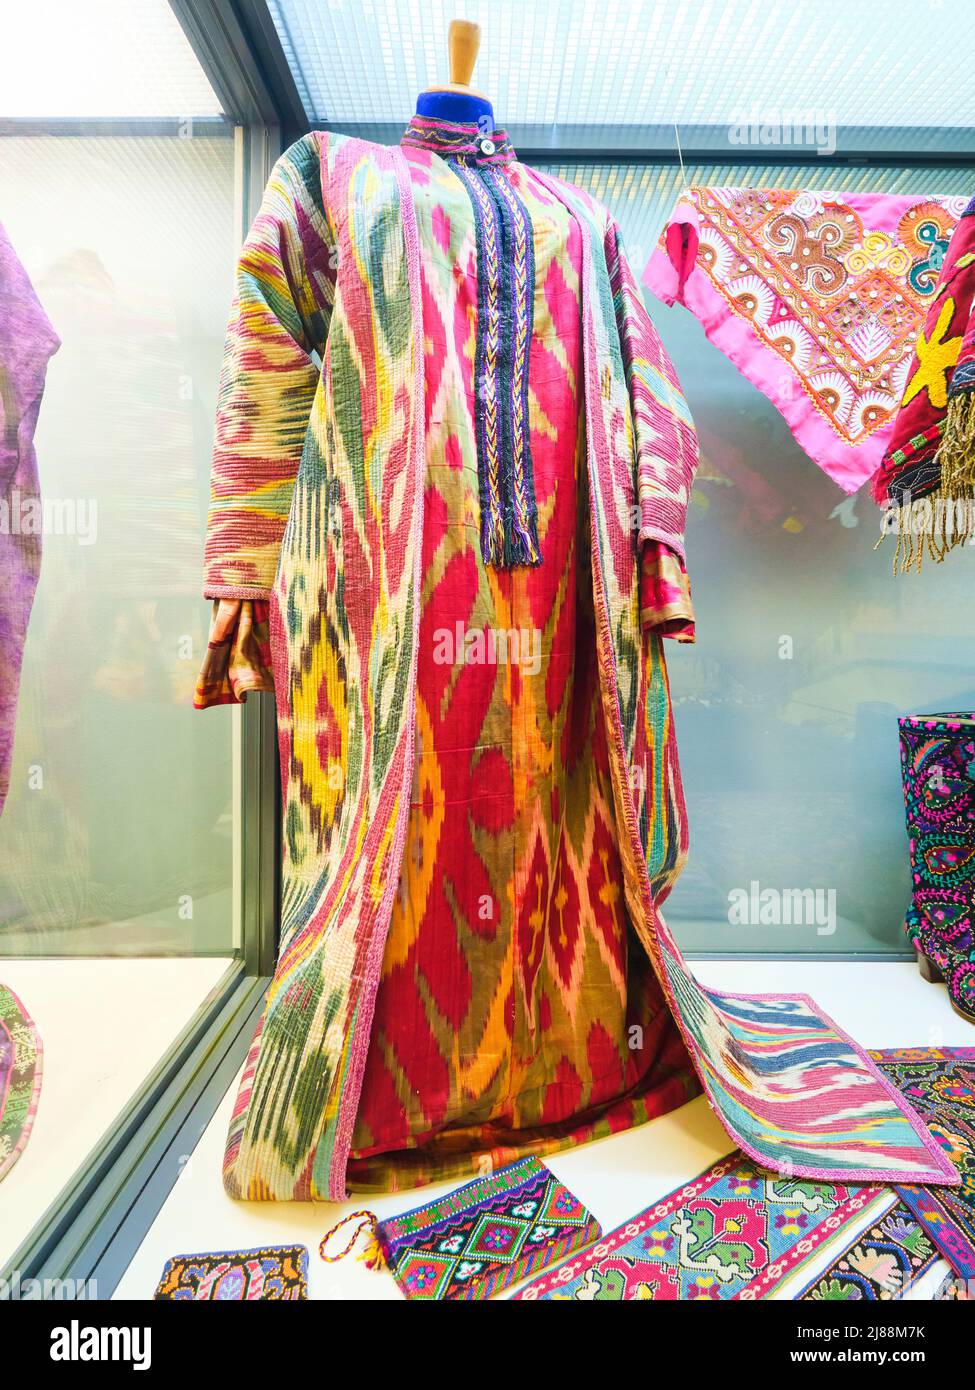 A display of ikat fabric for a traditional caftan, robe. At the Museum of Applied Arts in Tashkent, Uzbekistan. Stock Photo